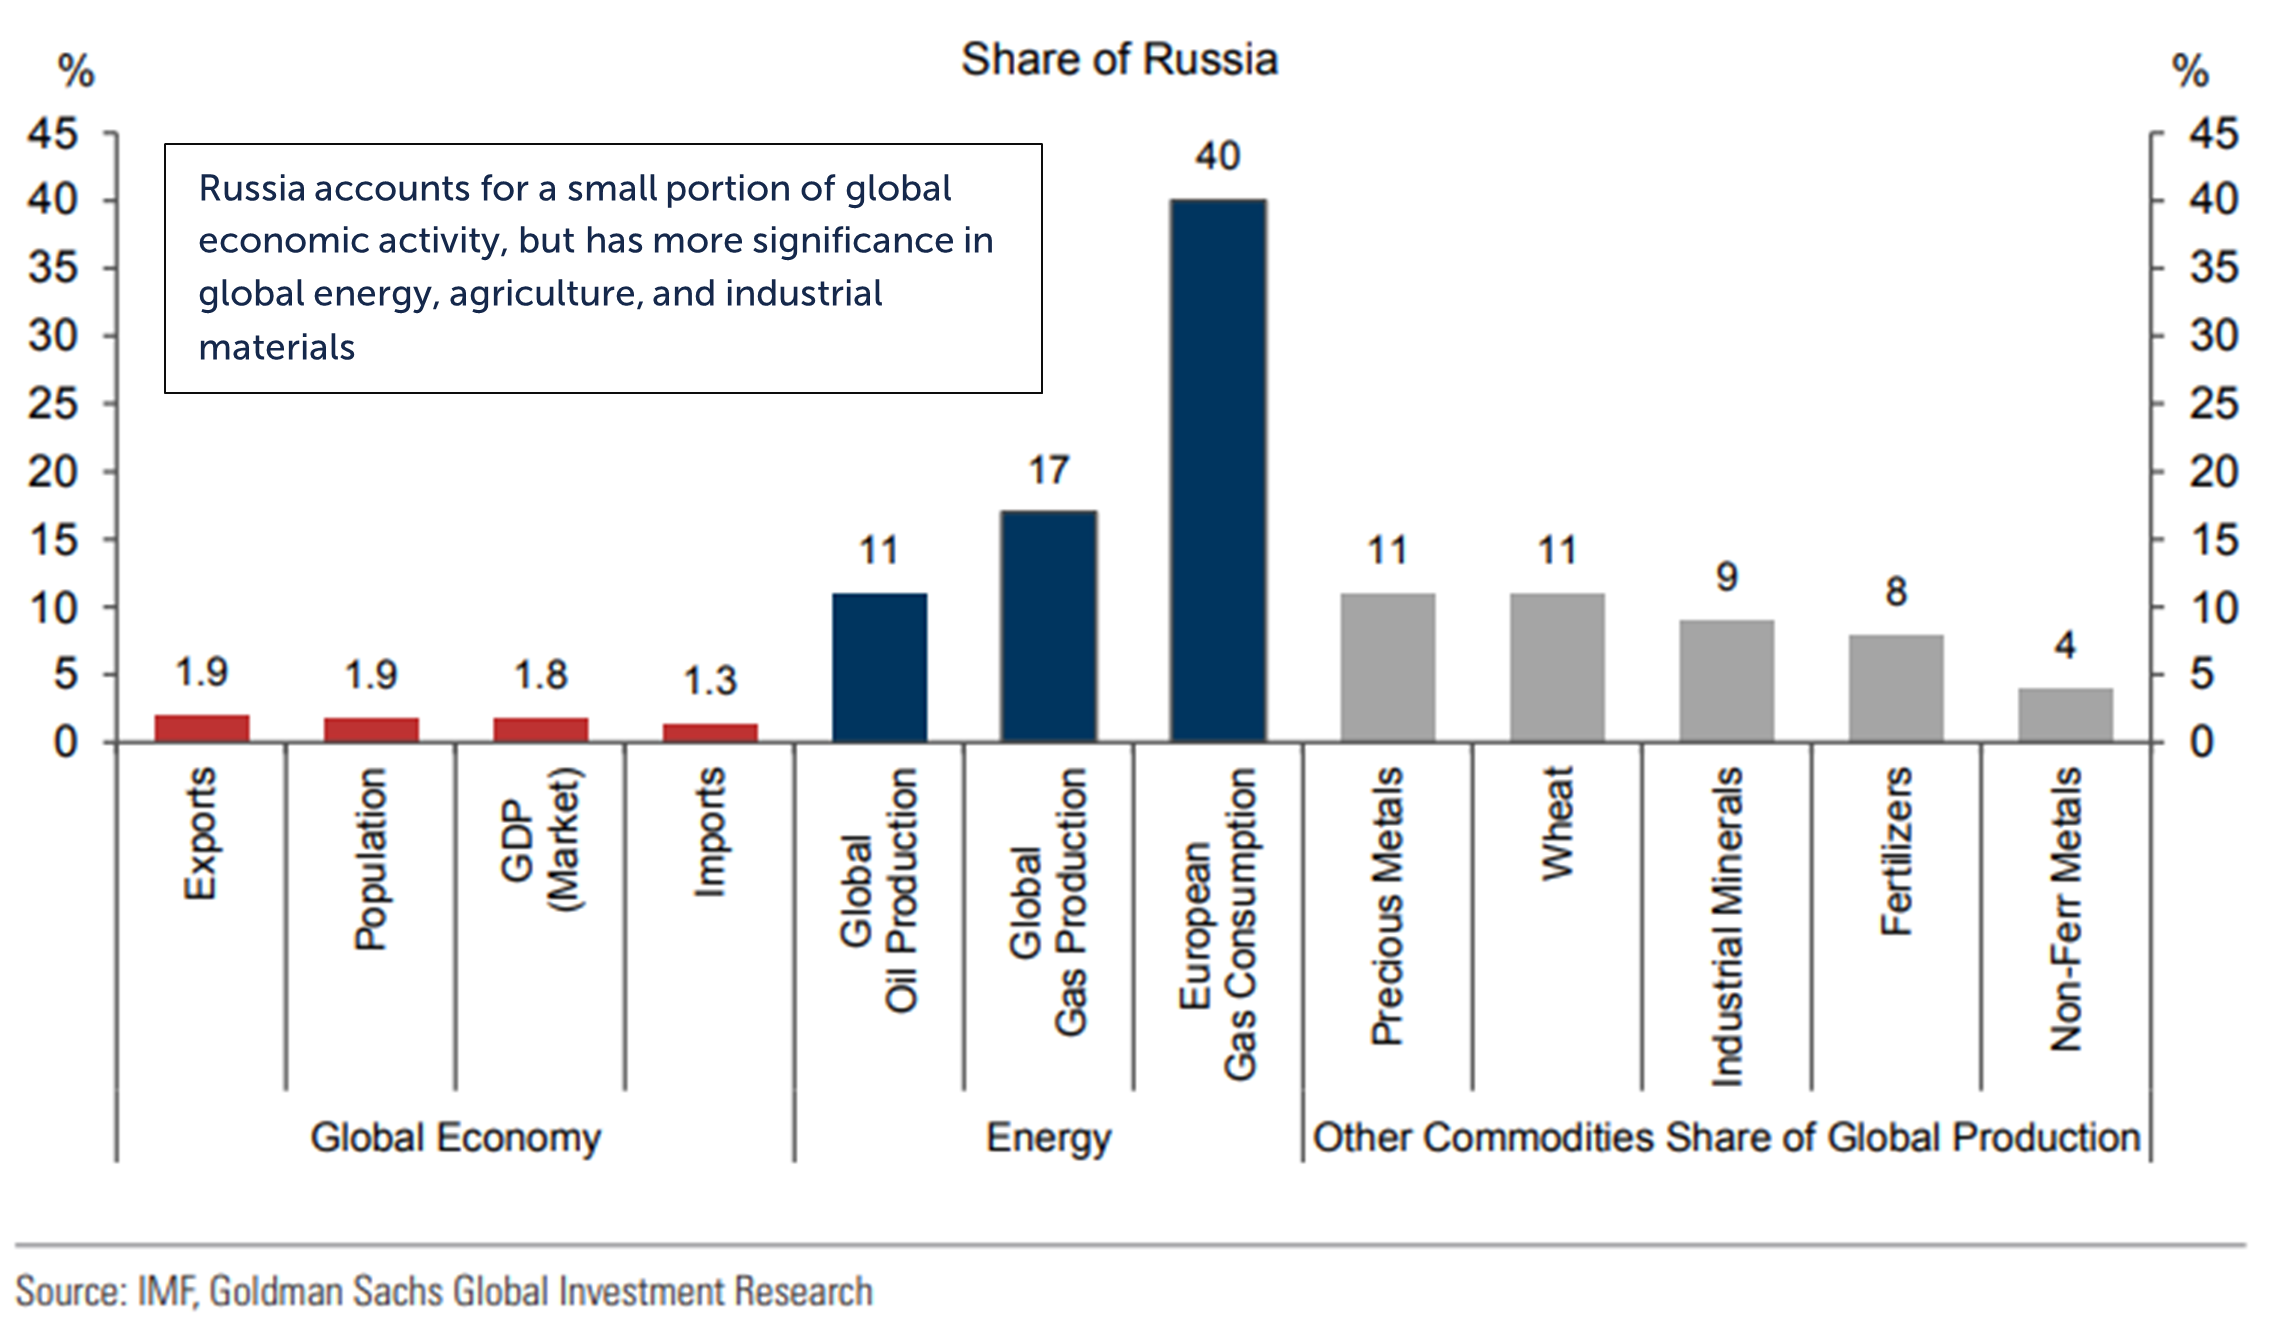 Bar graph depicting Share of Russia